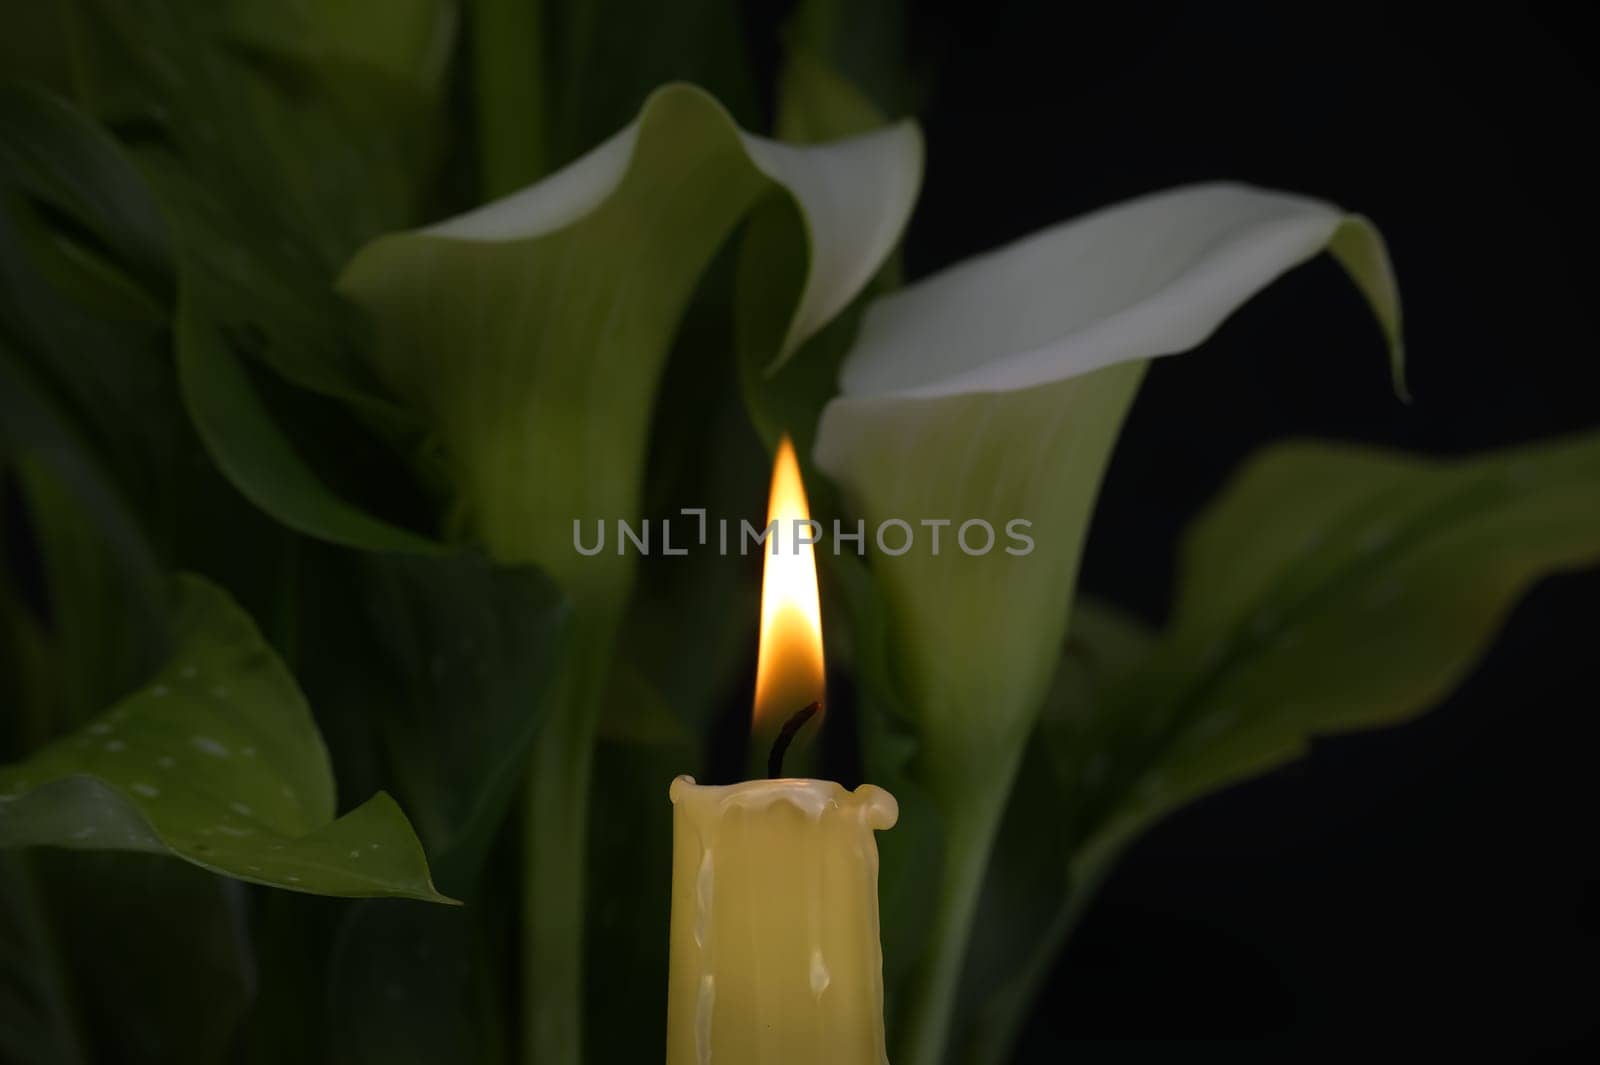 Burning wax candle in close up and white calla lily by NetPix